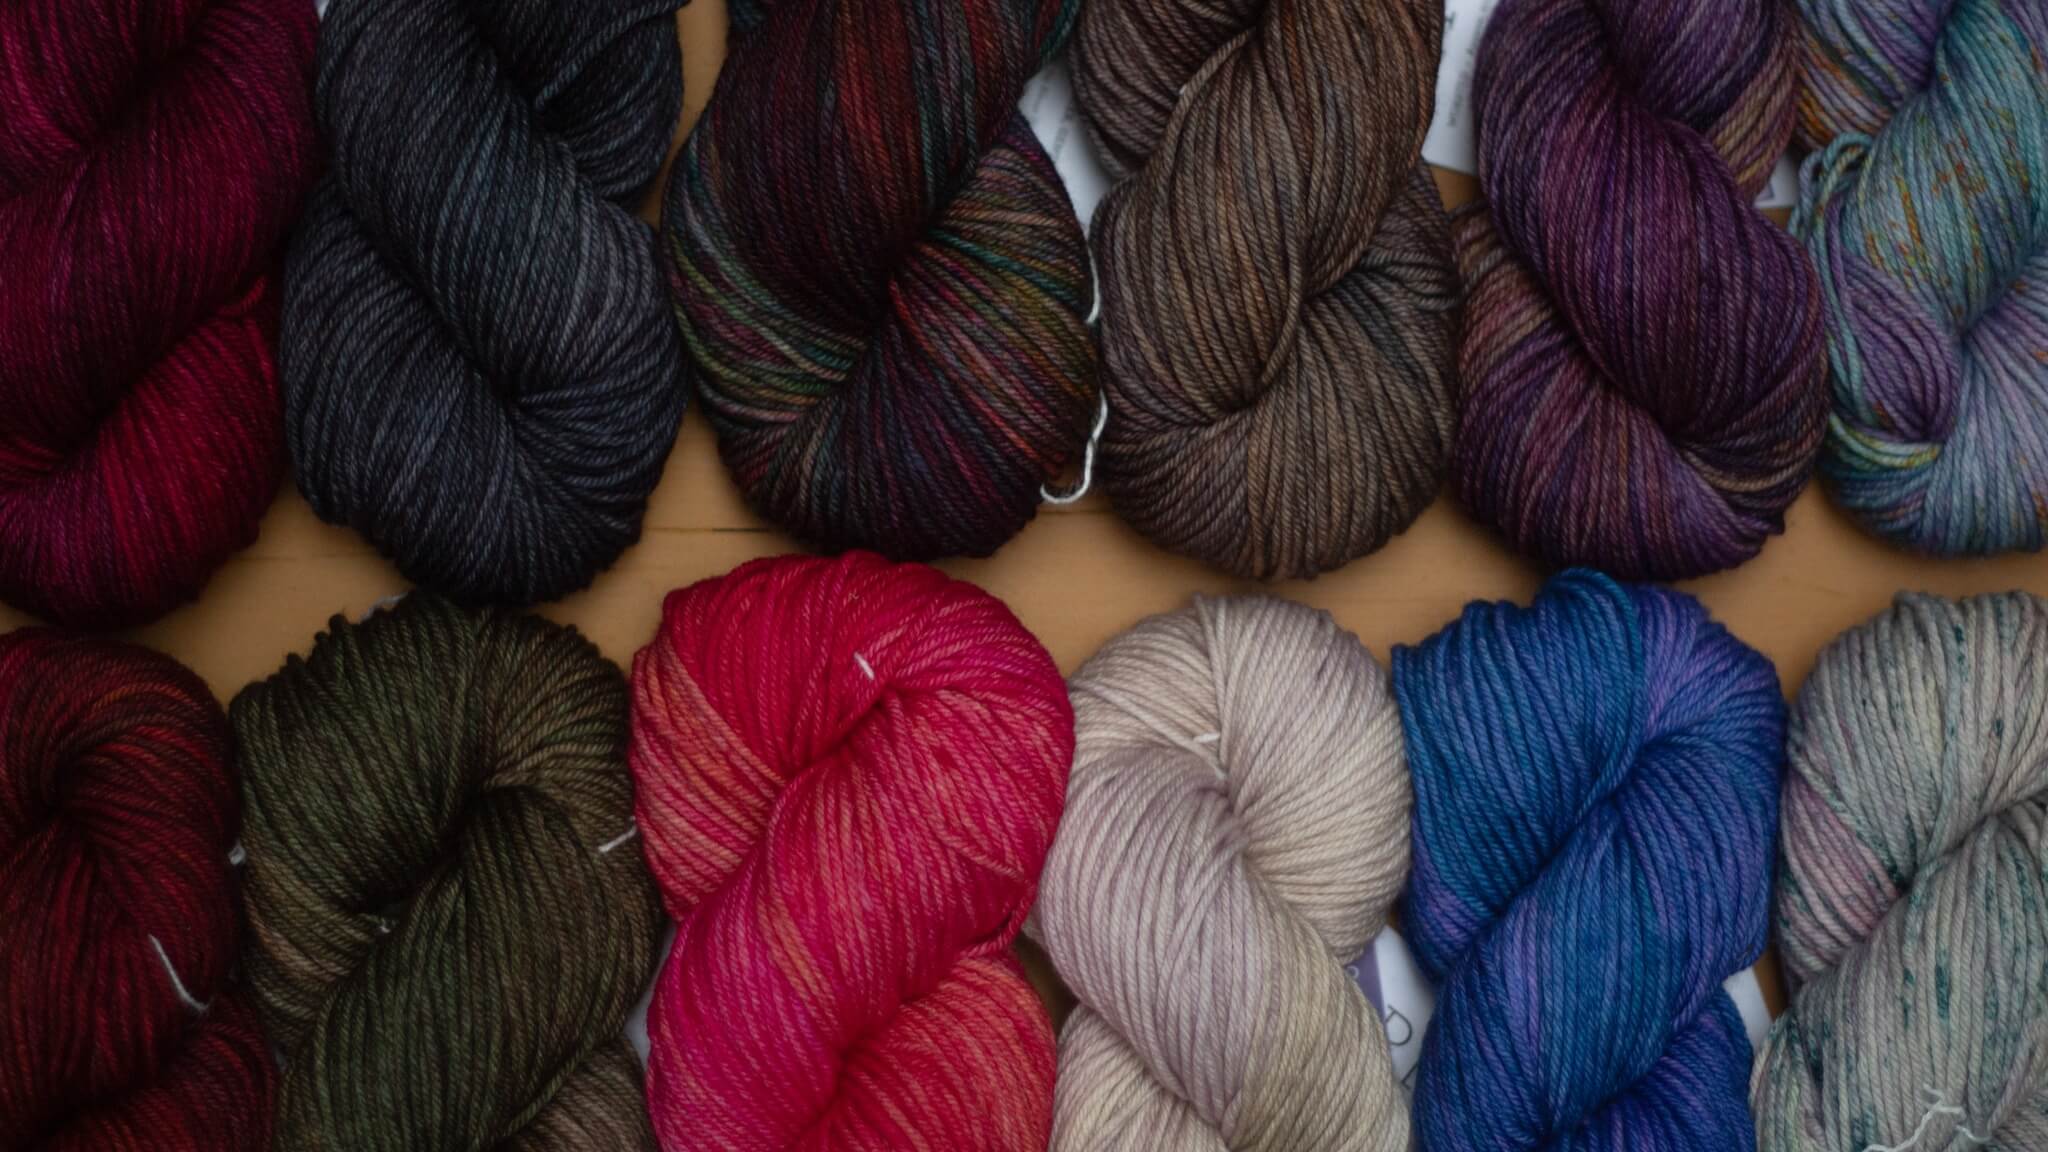 A pile of several hanks of Lucky Tweed yarn in a variety of colors